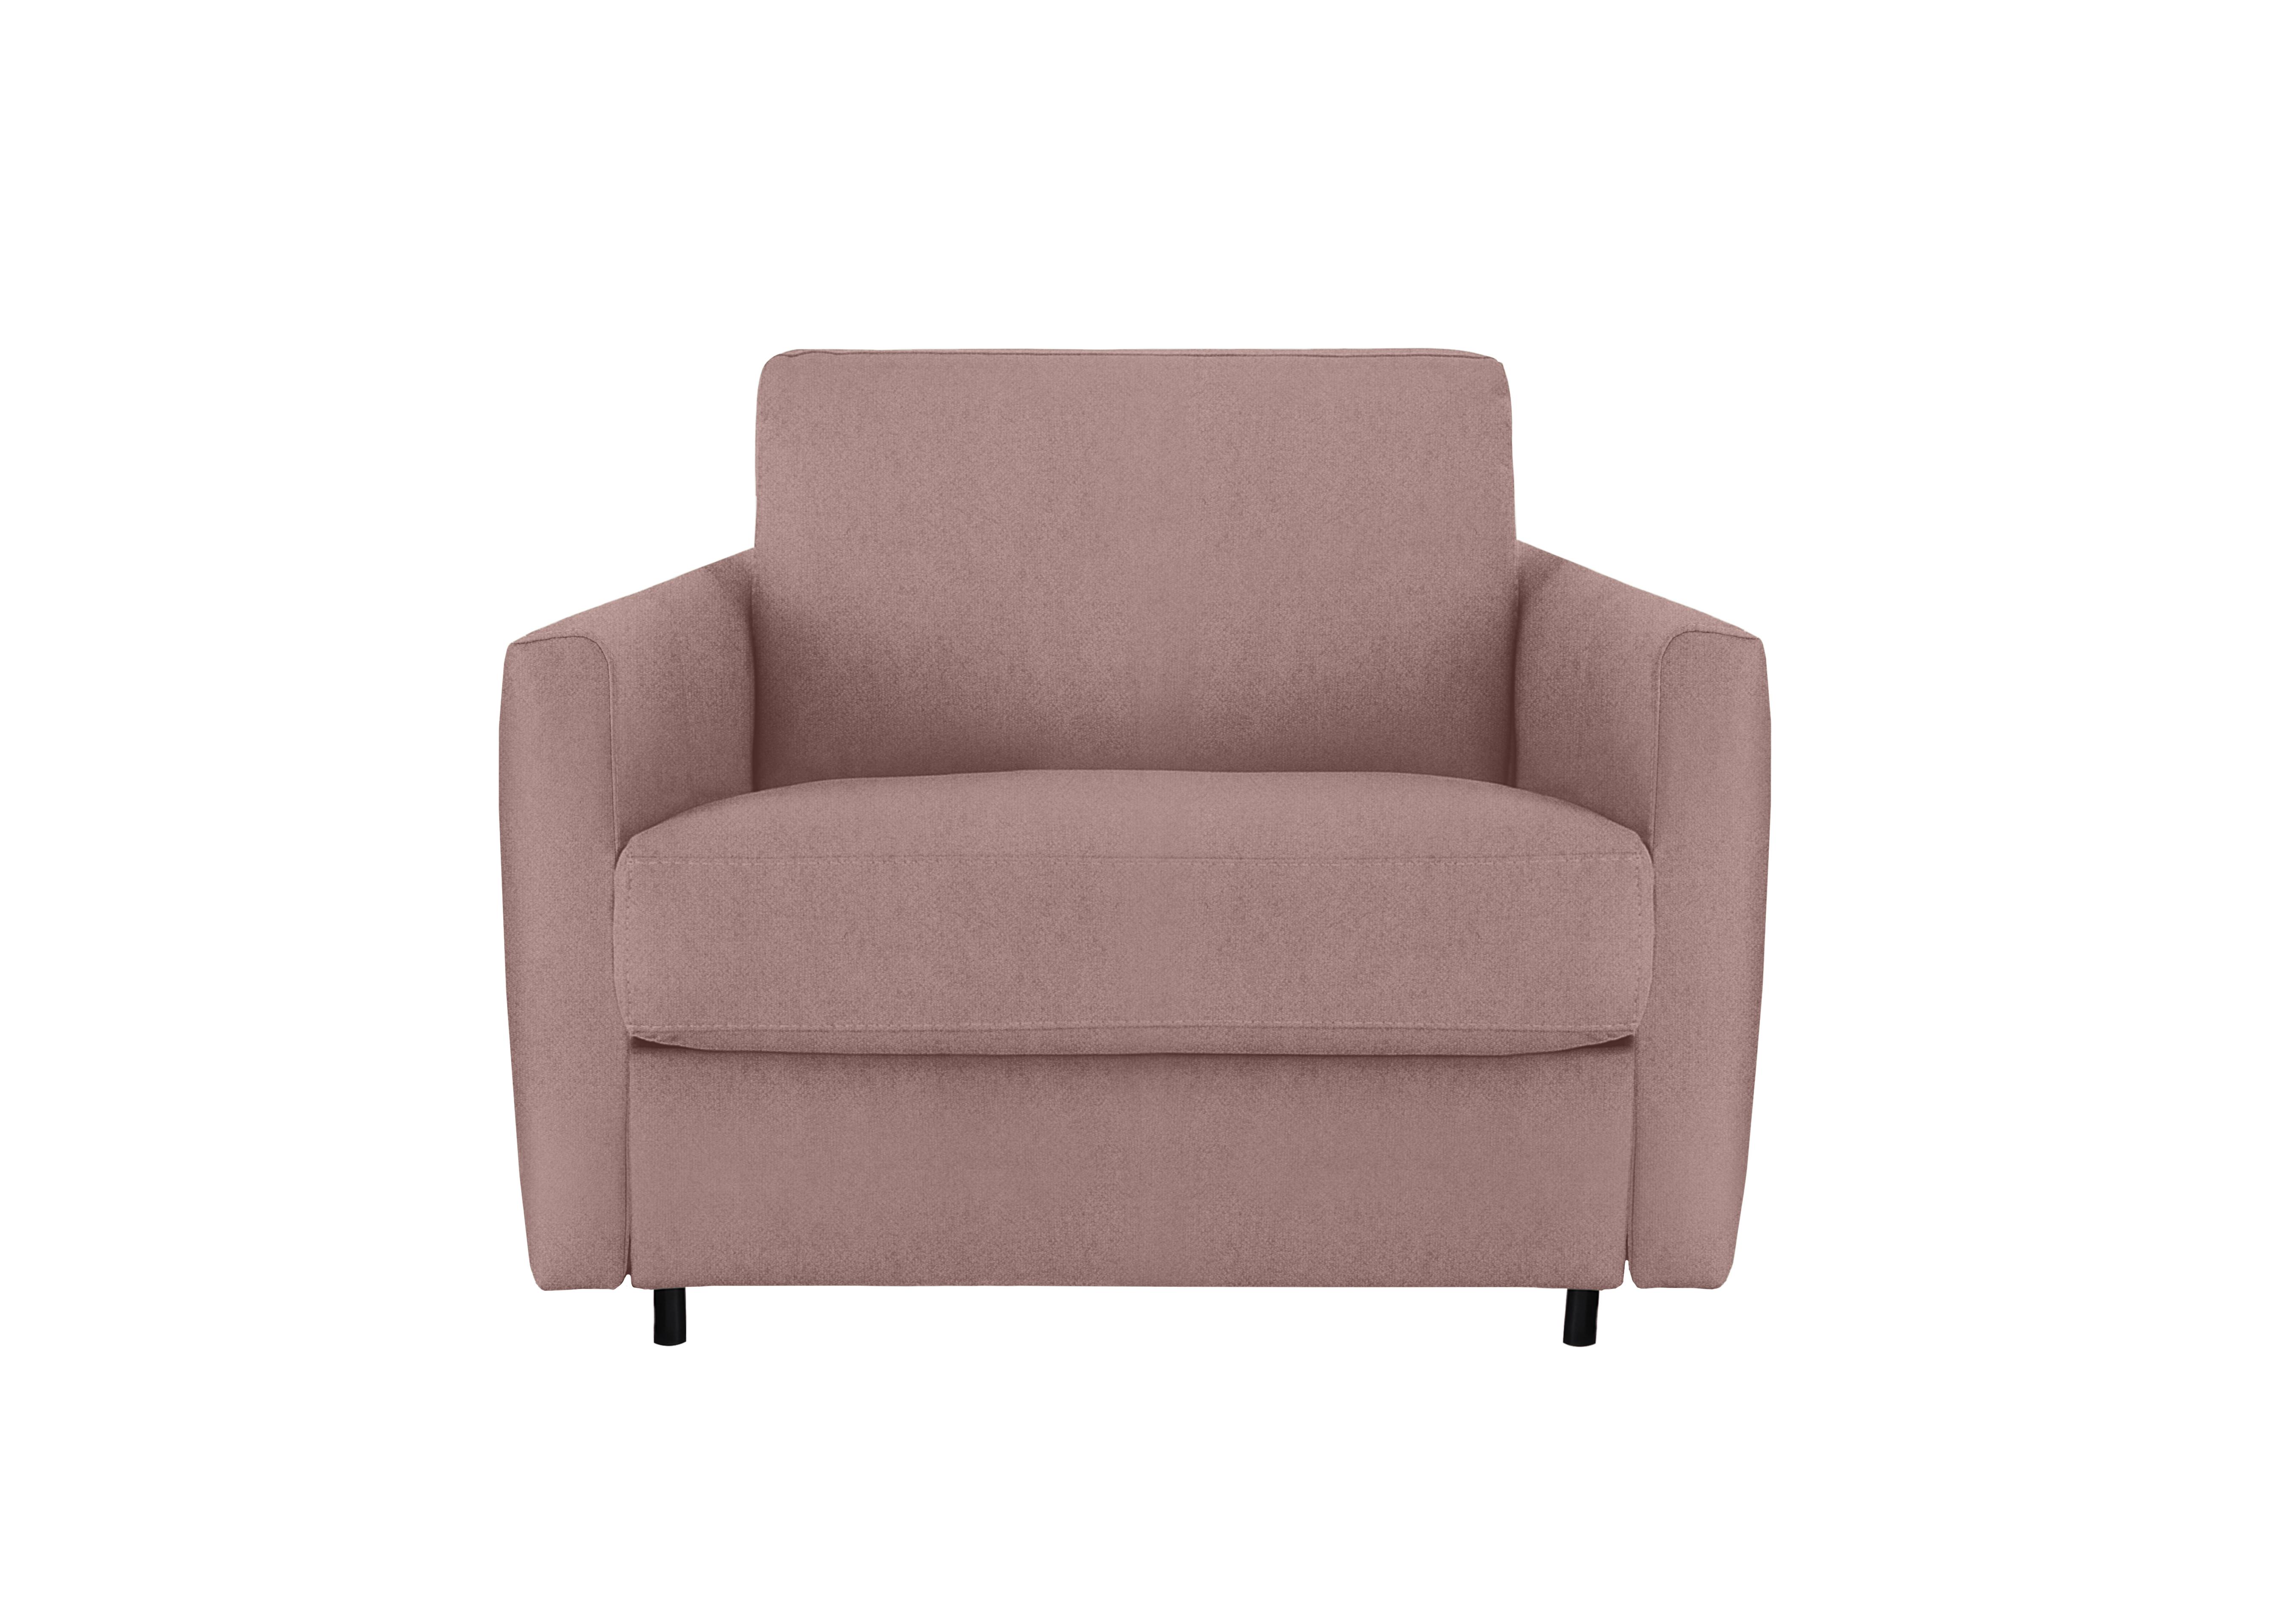 Alcova Fabric Chair Sofa Bed with Slim Arms in Fuente Coral on Furniture Village